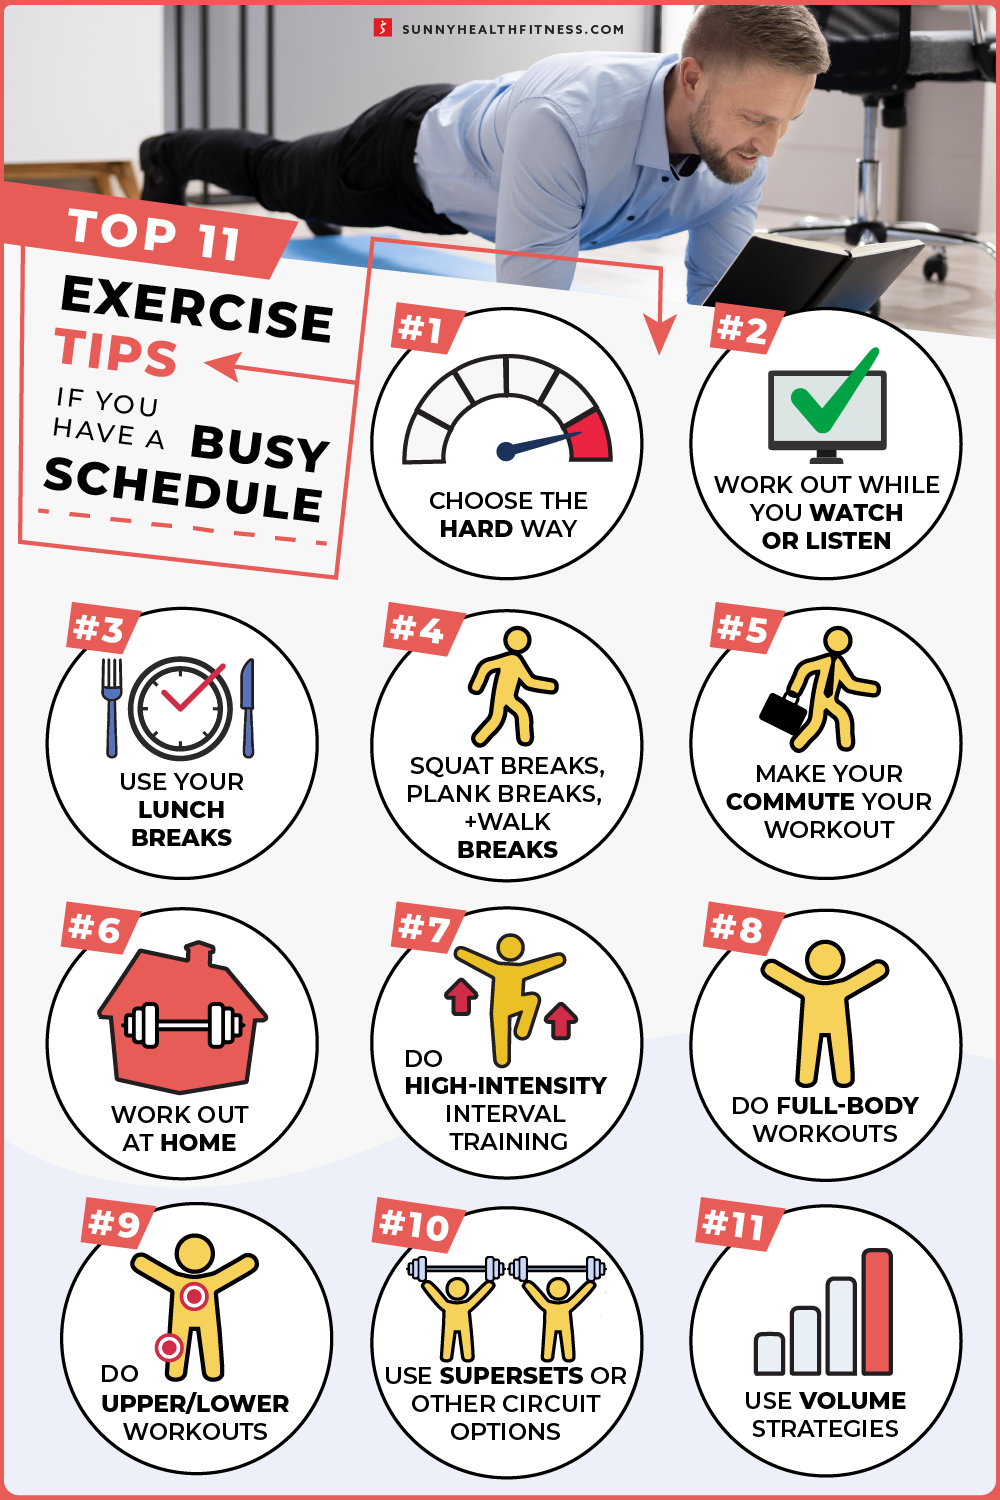 Top 11 Exercise Tips if You Have a Busy Schedule Infographic